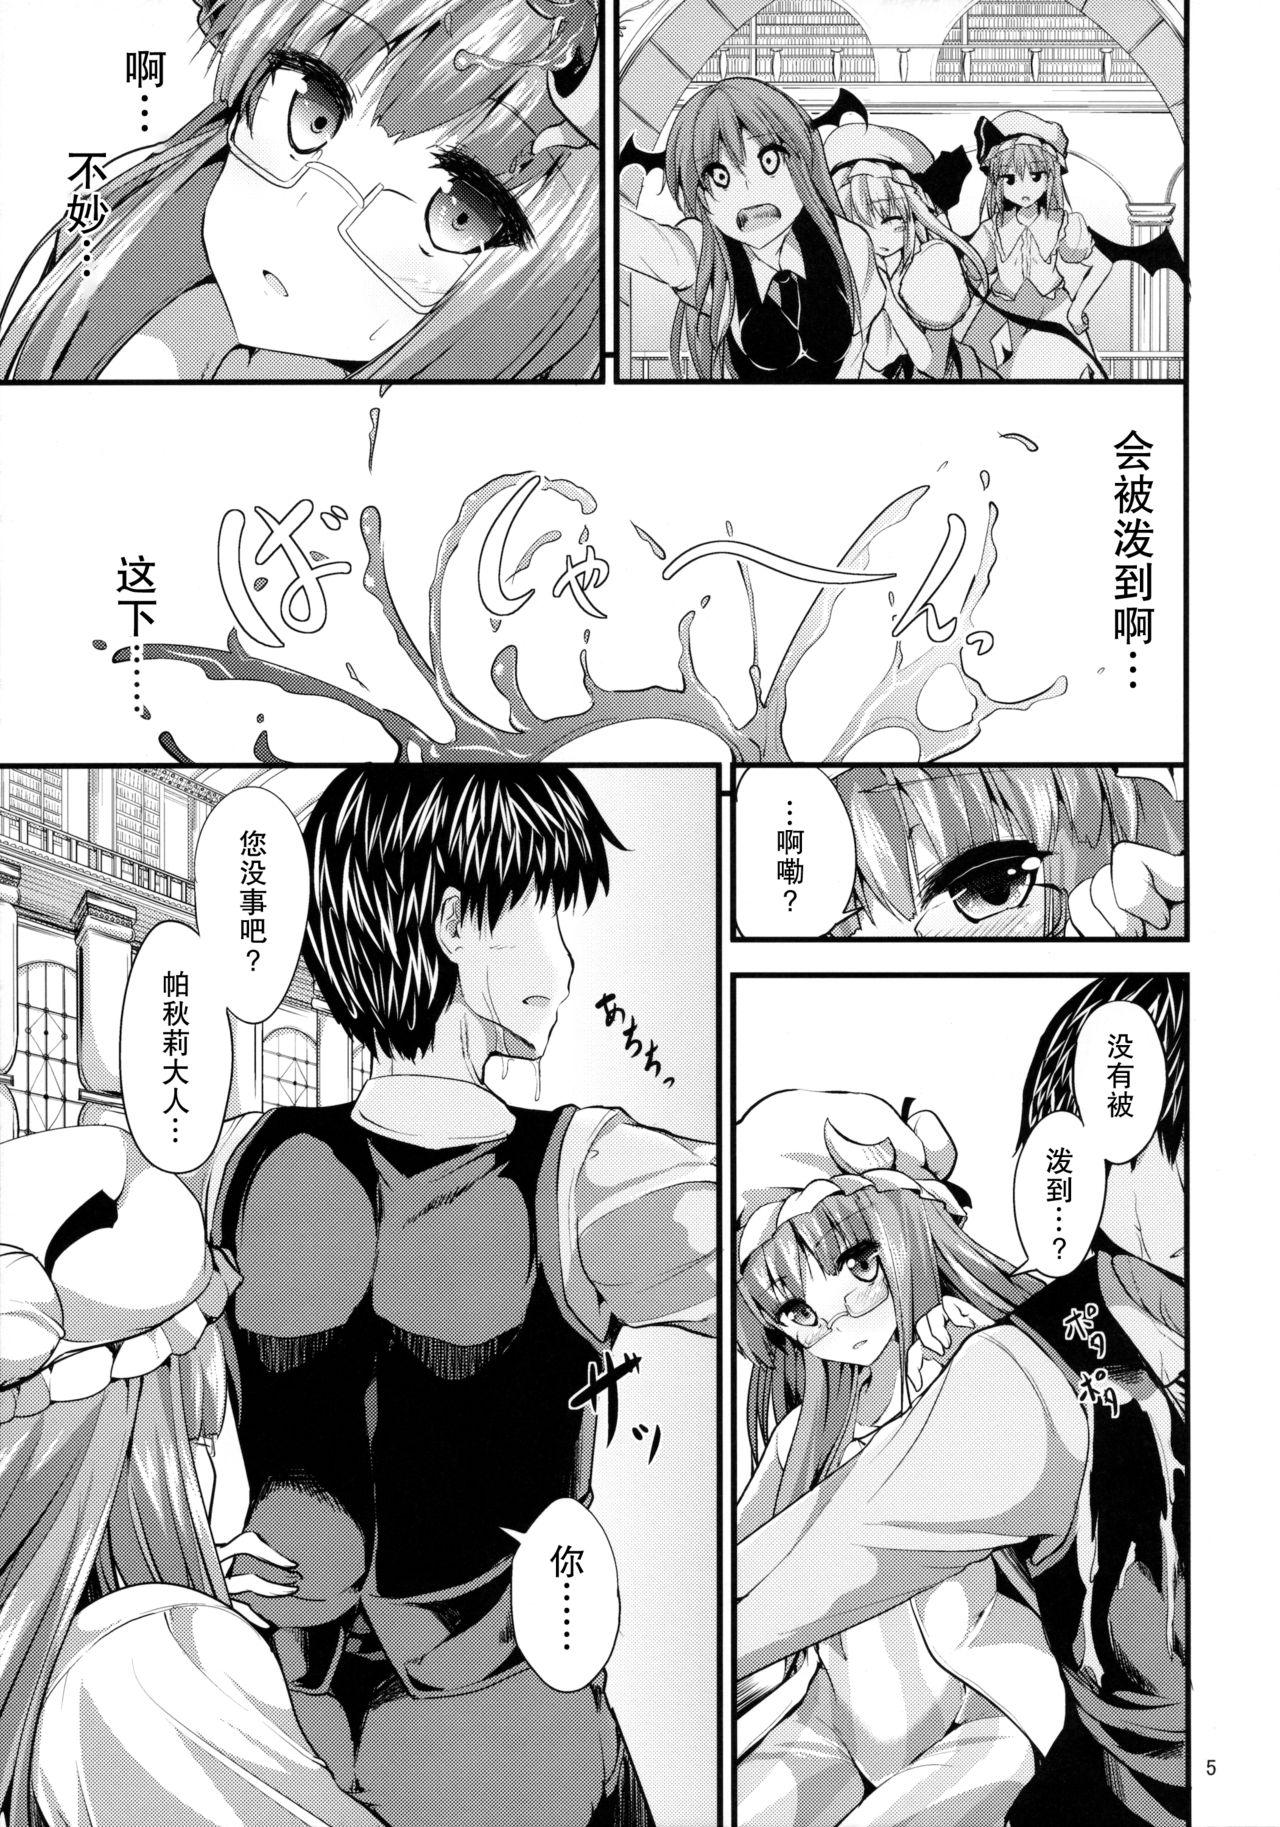 Ametur Porn Awacche - Touhou project Tanned - Page 5